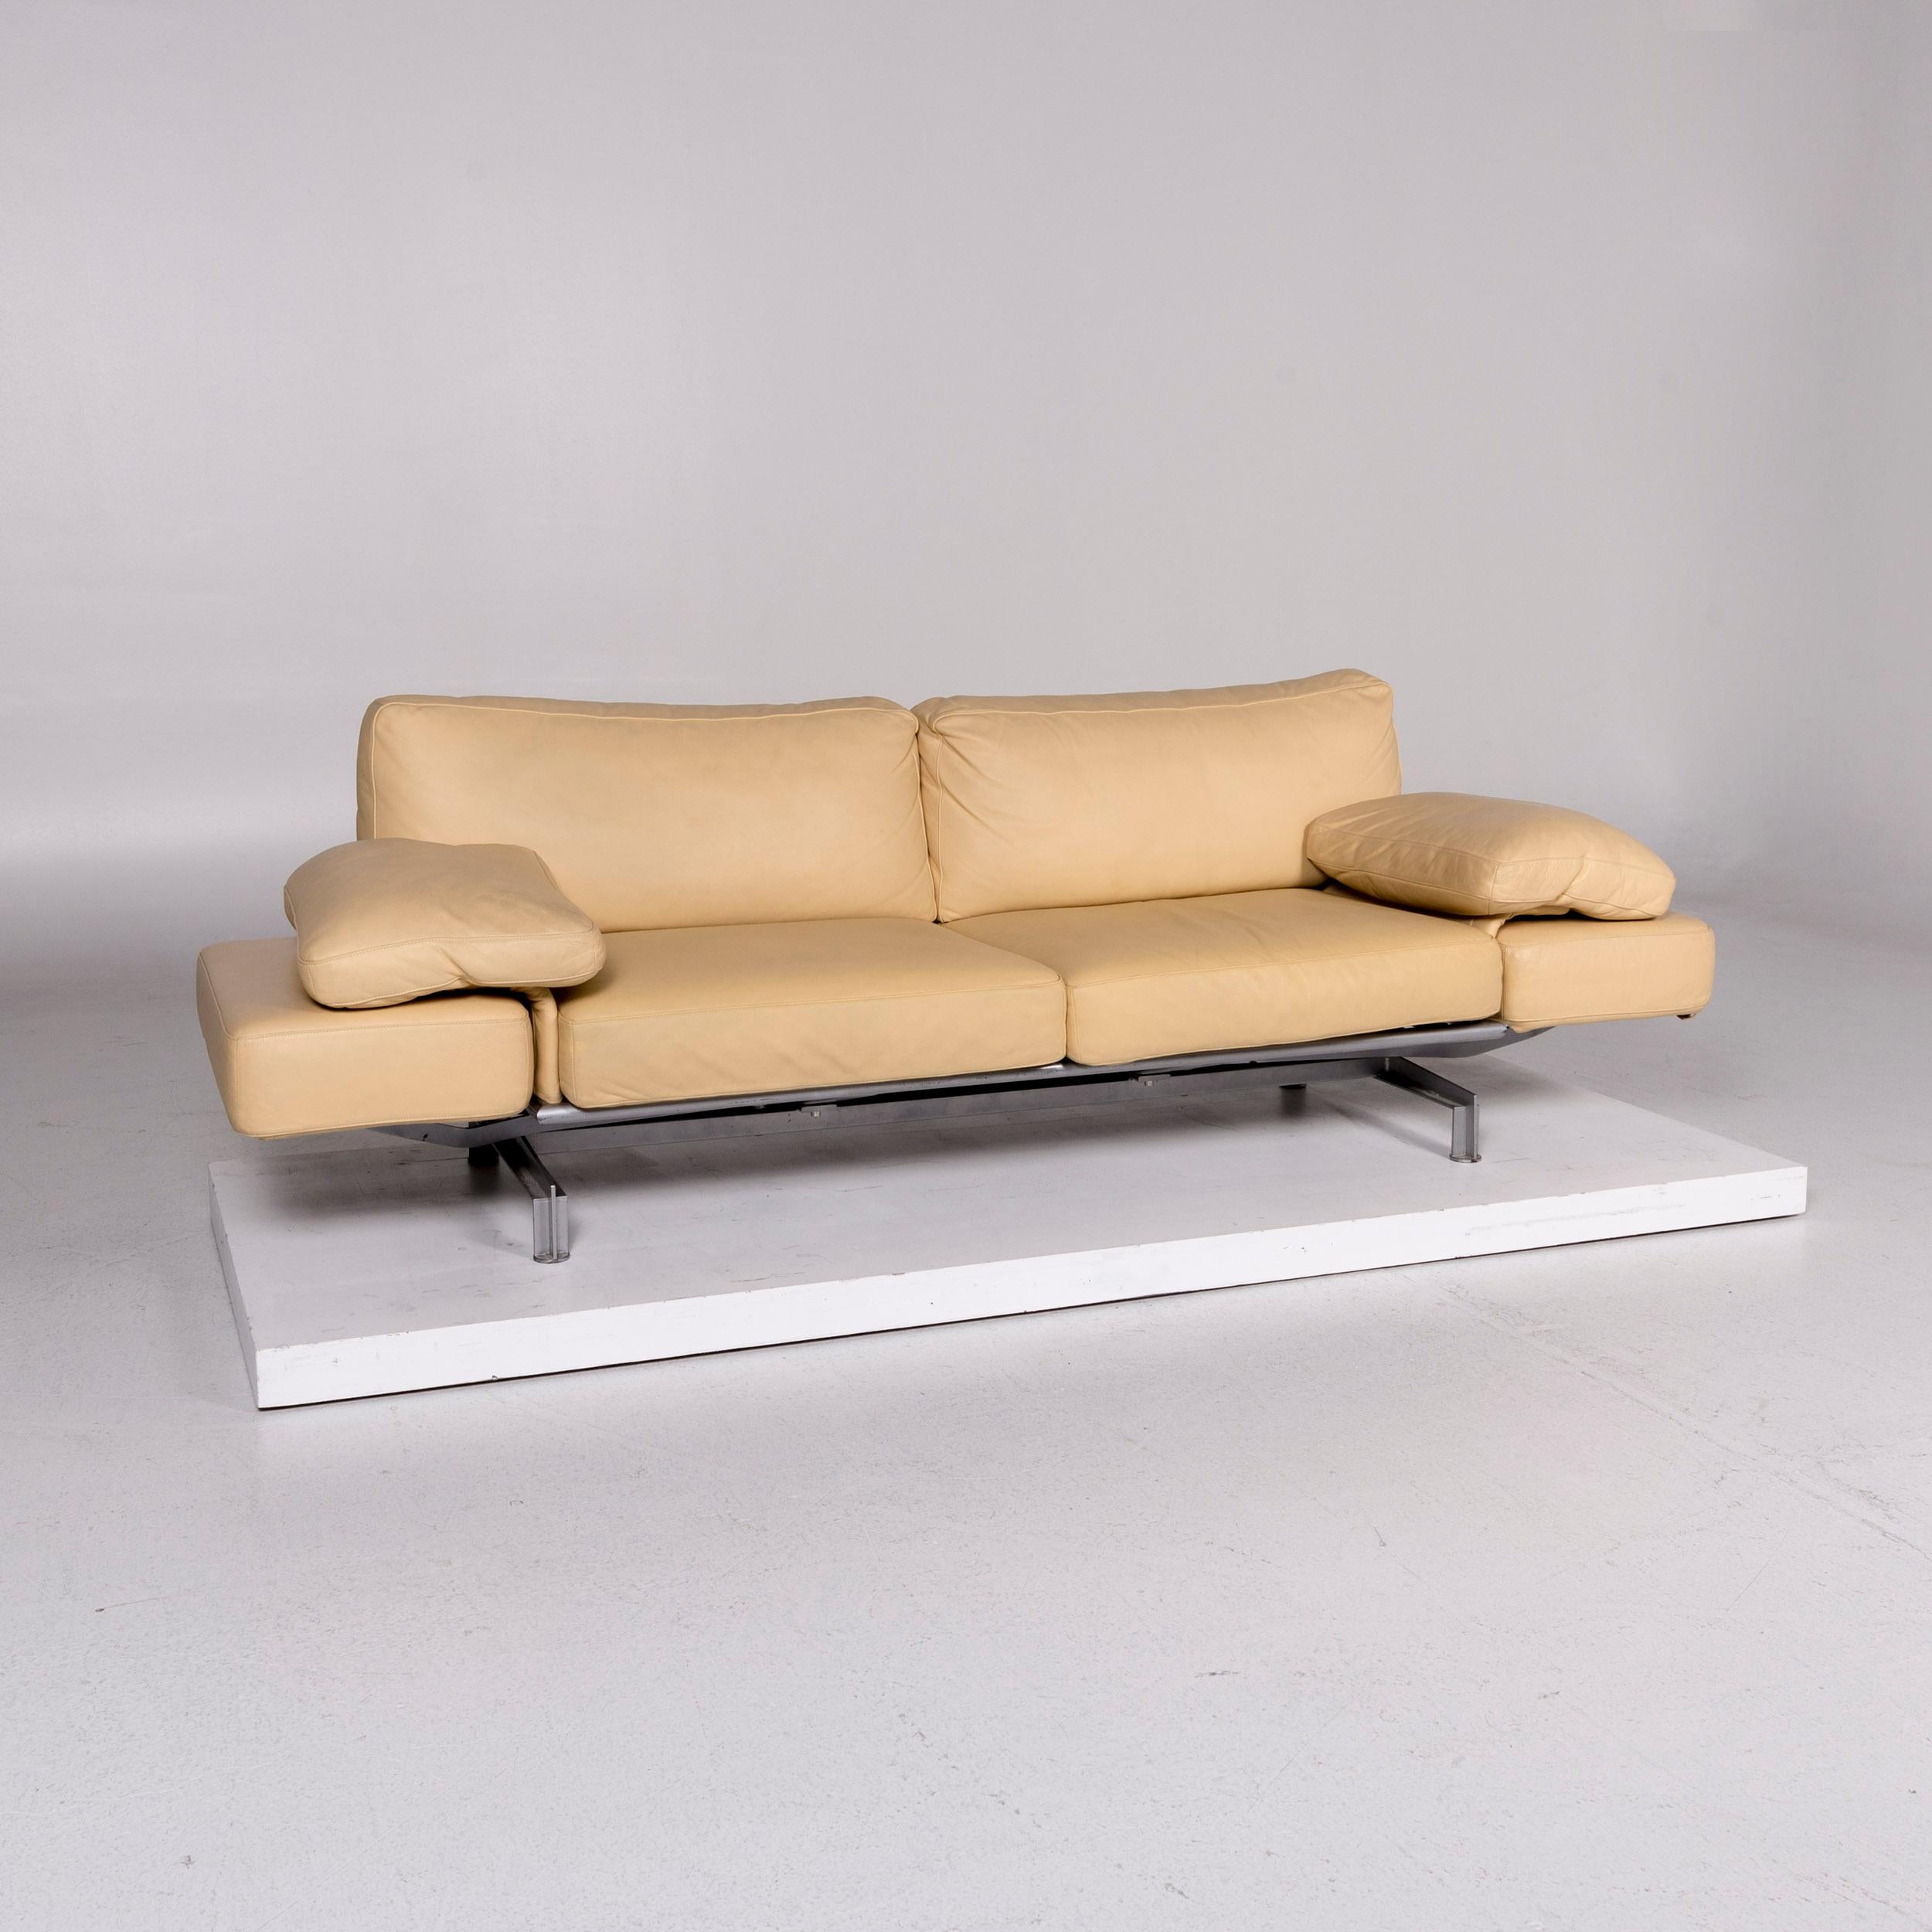 We bring to you a WK Wohnen Gaetano 687 leather sofa beige two-seat function relaxation couch.

 
 Product measurements in centimeters:
 
Depth 89
Width 245
Height 79
Seat-height 42
Rest-height 62
Seat-depth 53
Seat-width 127
Back-height